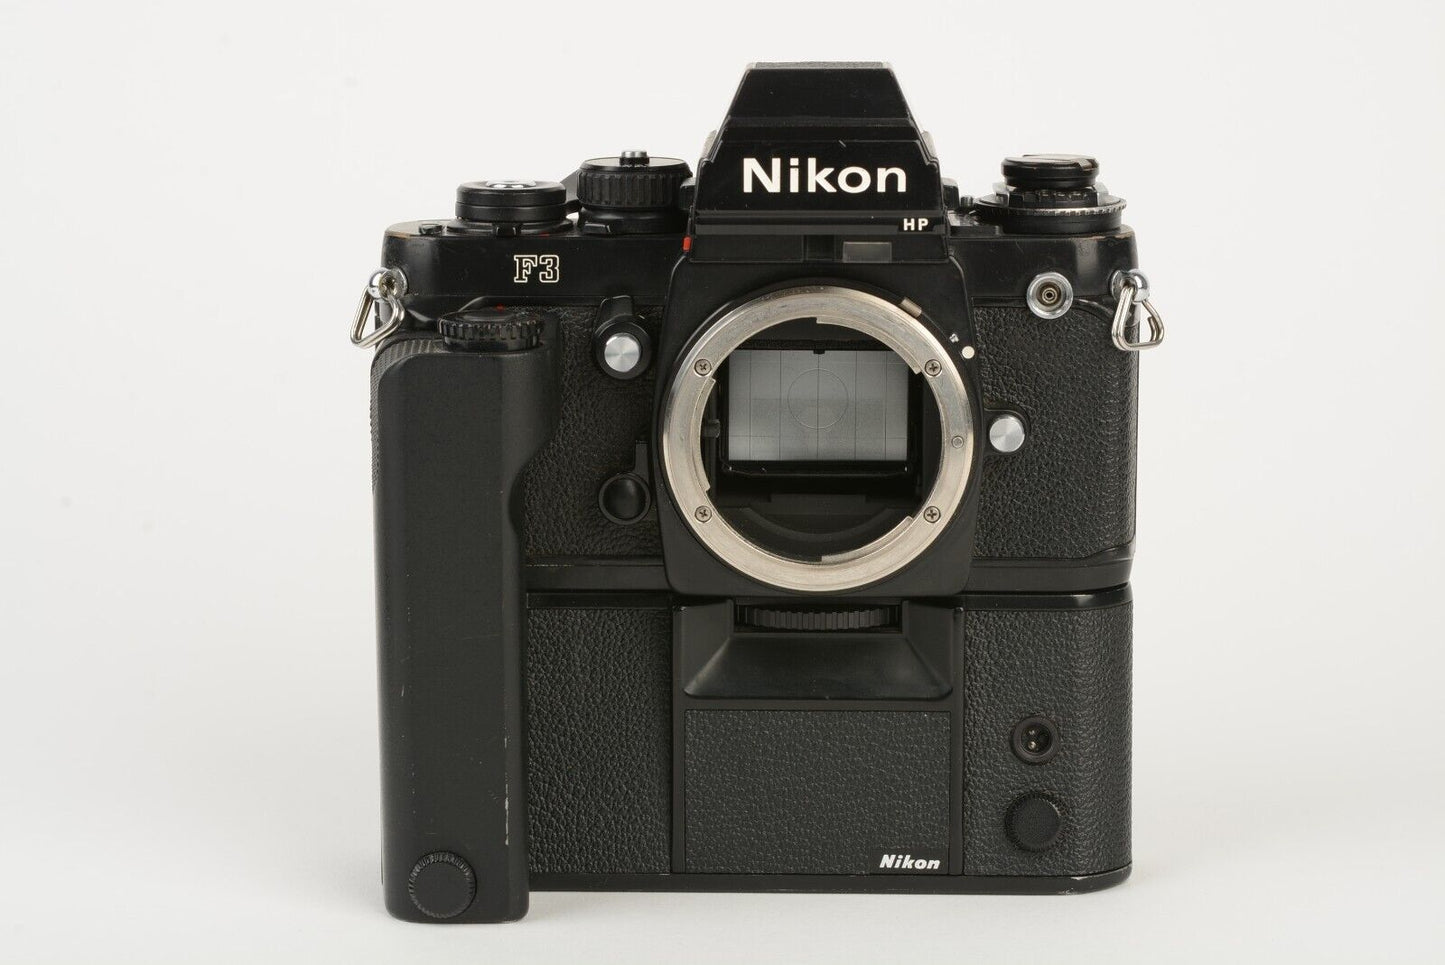 EXC++ NIKON F3 HP 35mm BODY w/MD-4, NEW SEALS, TESTED VERY NICE & CLEAN ACCURATE